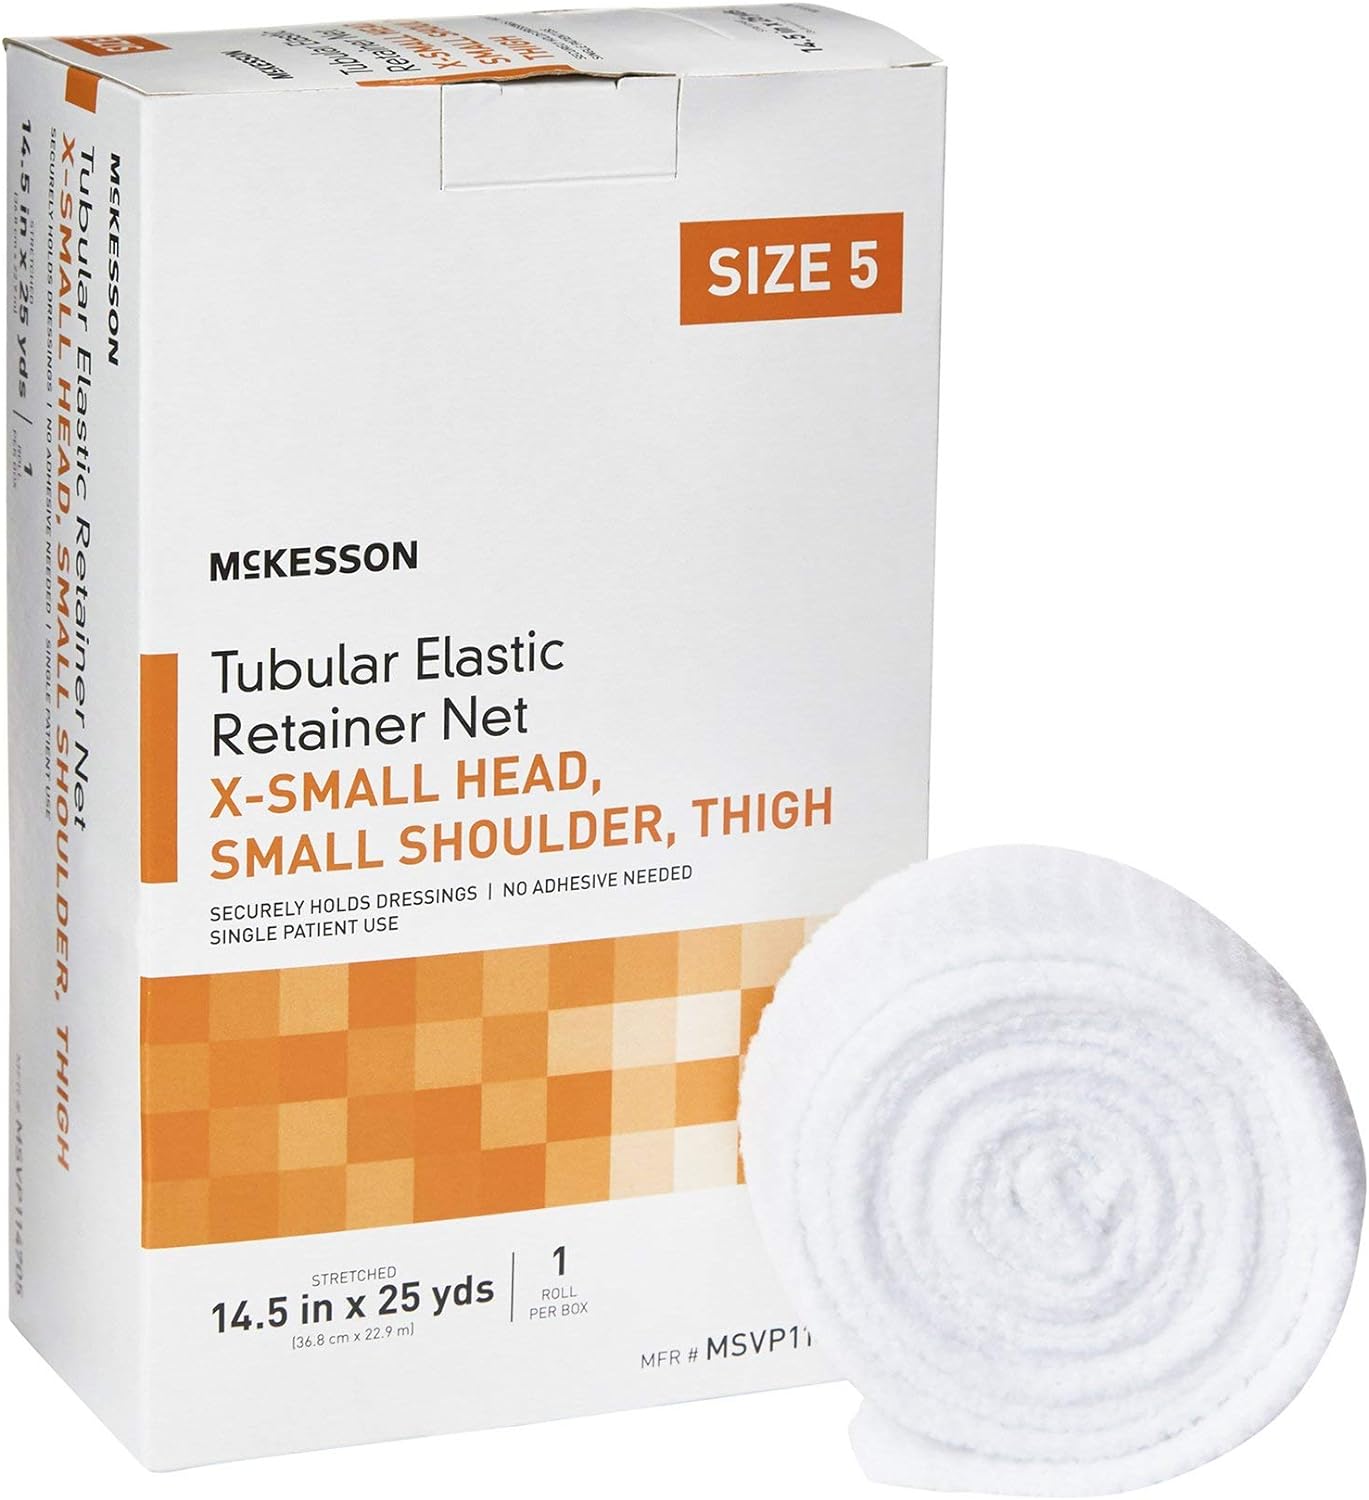 McKesson Tubular Elastic Retainer Net Dressing, Non-Sterile, XS Head, Small Shoulder, Thigh, Size 5, 14 1/2 in x 25 yd, 1 Count, 1 Pack